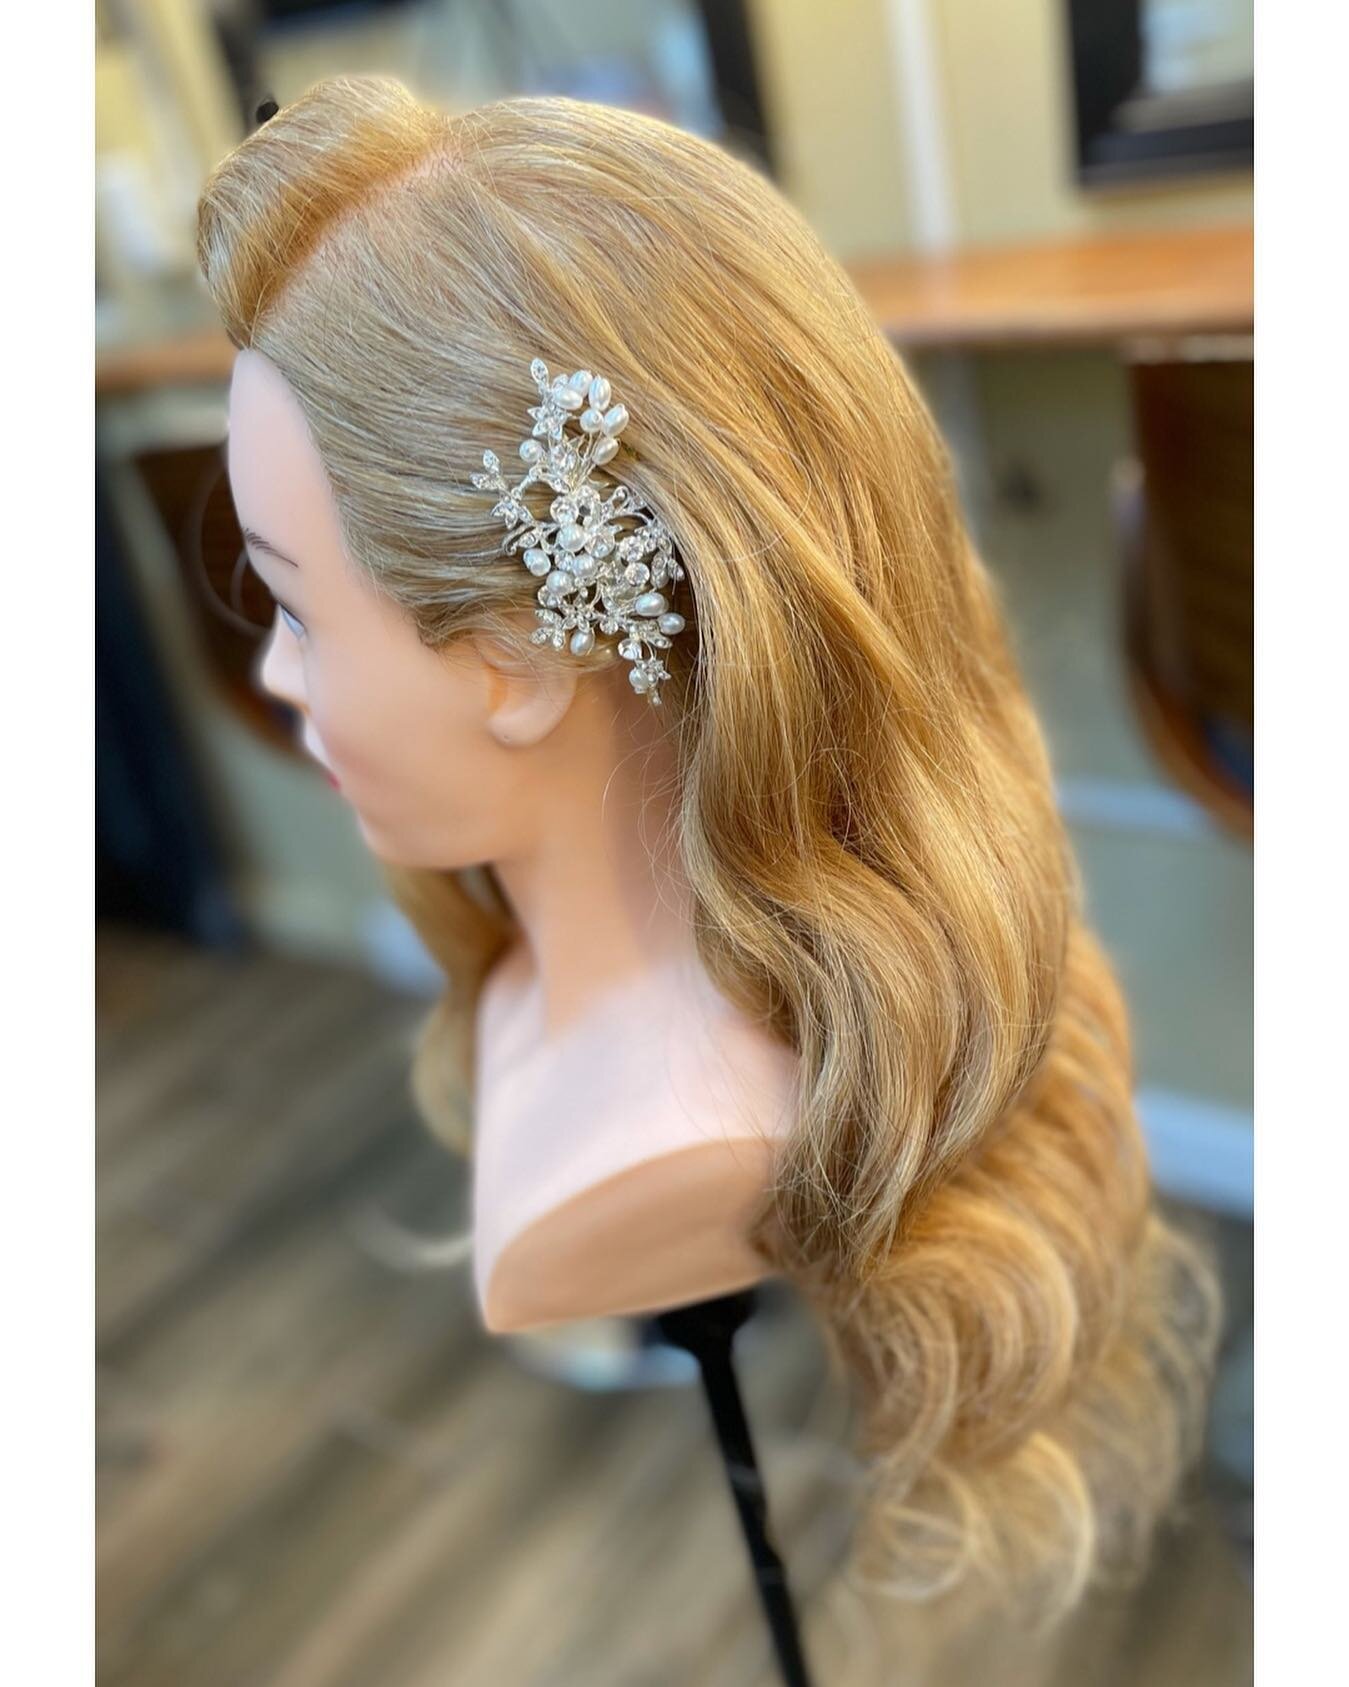 ✨Hollywood Waves✨
I&rsquo;m not mad at my 1st attempt creating these glamorous pin curl waves. 😅
Taught by the very talented @prettylilrenee 
.
.
.
.
.
#hollywoodwaves #hollywoodwaveshair #glamourous #oldhollywoodglamour  #oldhollywoodhair #bridalha